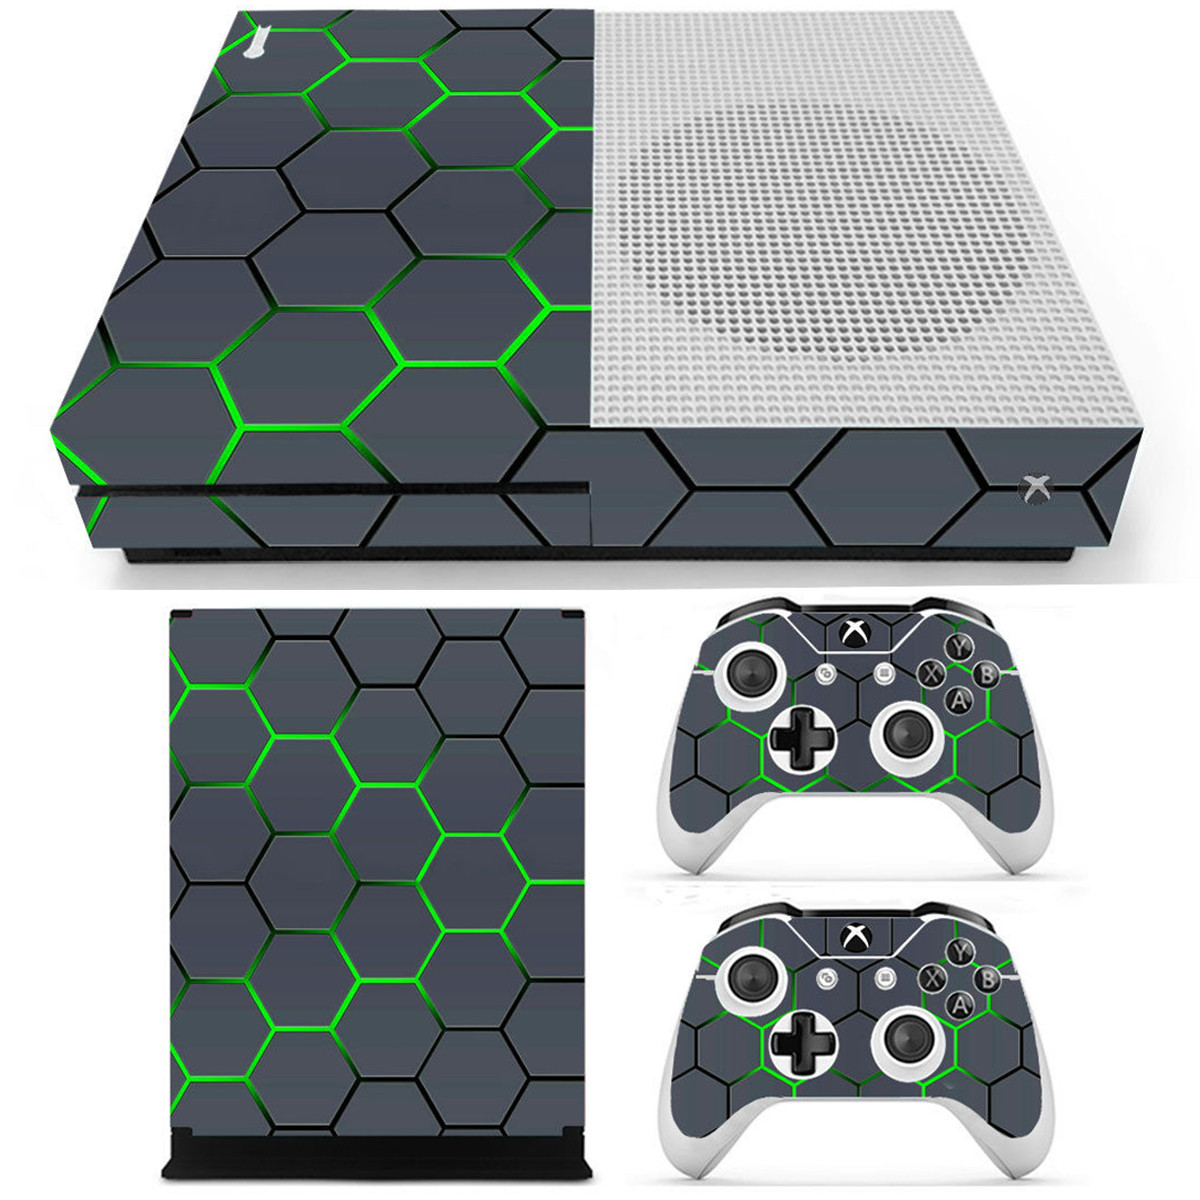 Green Grid Vinyl Decal Skin Stickers Cover for Xbox One S Game Console&2 Controllers 55